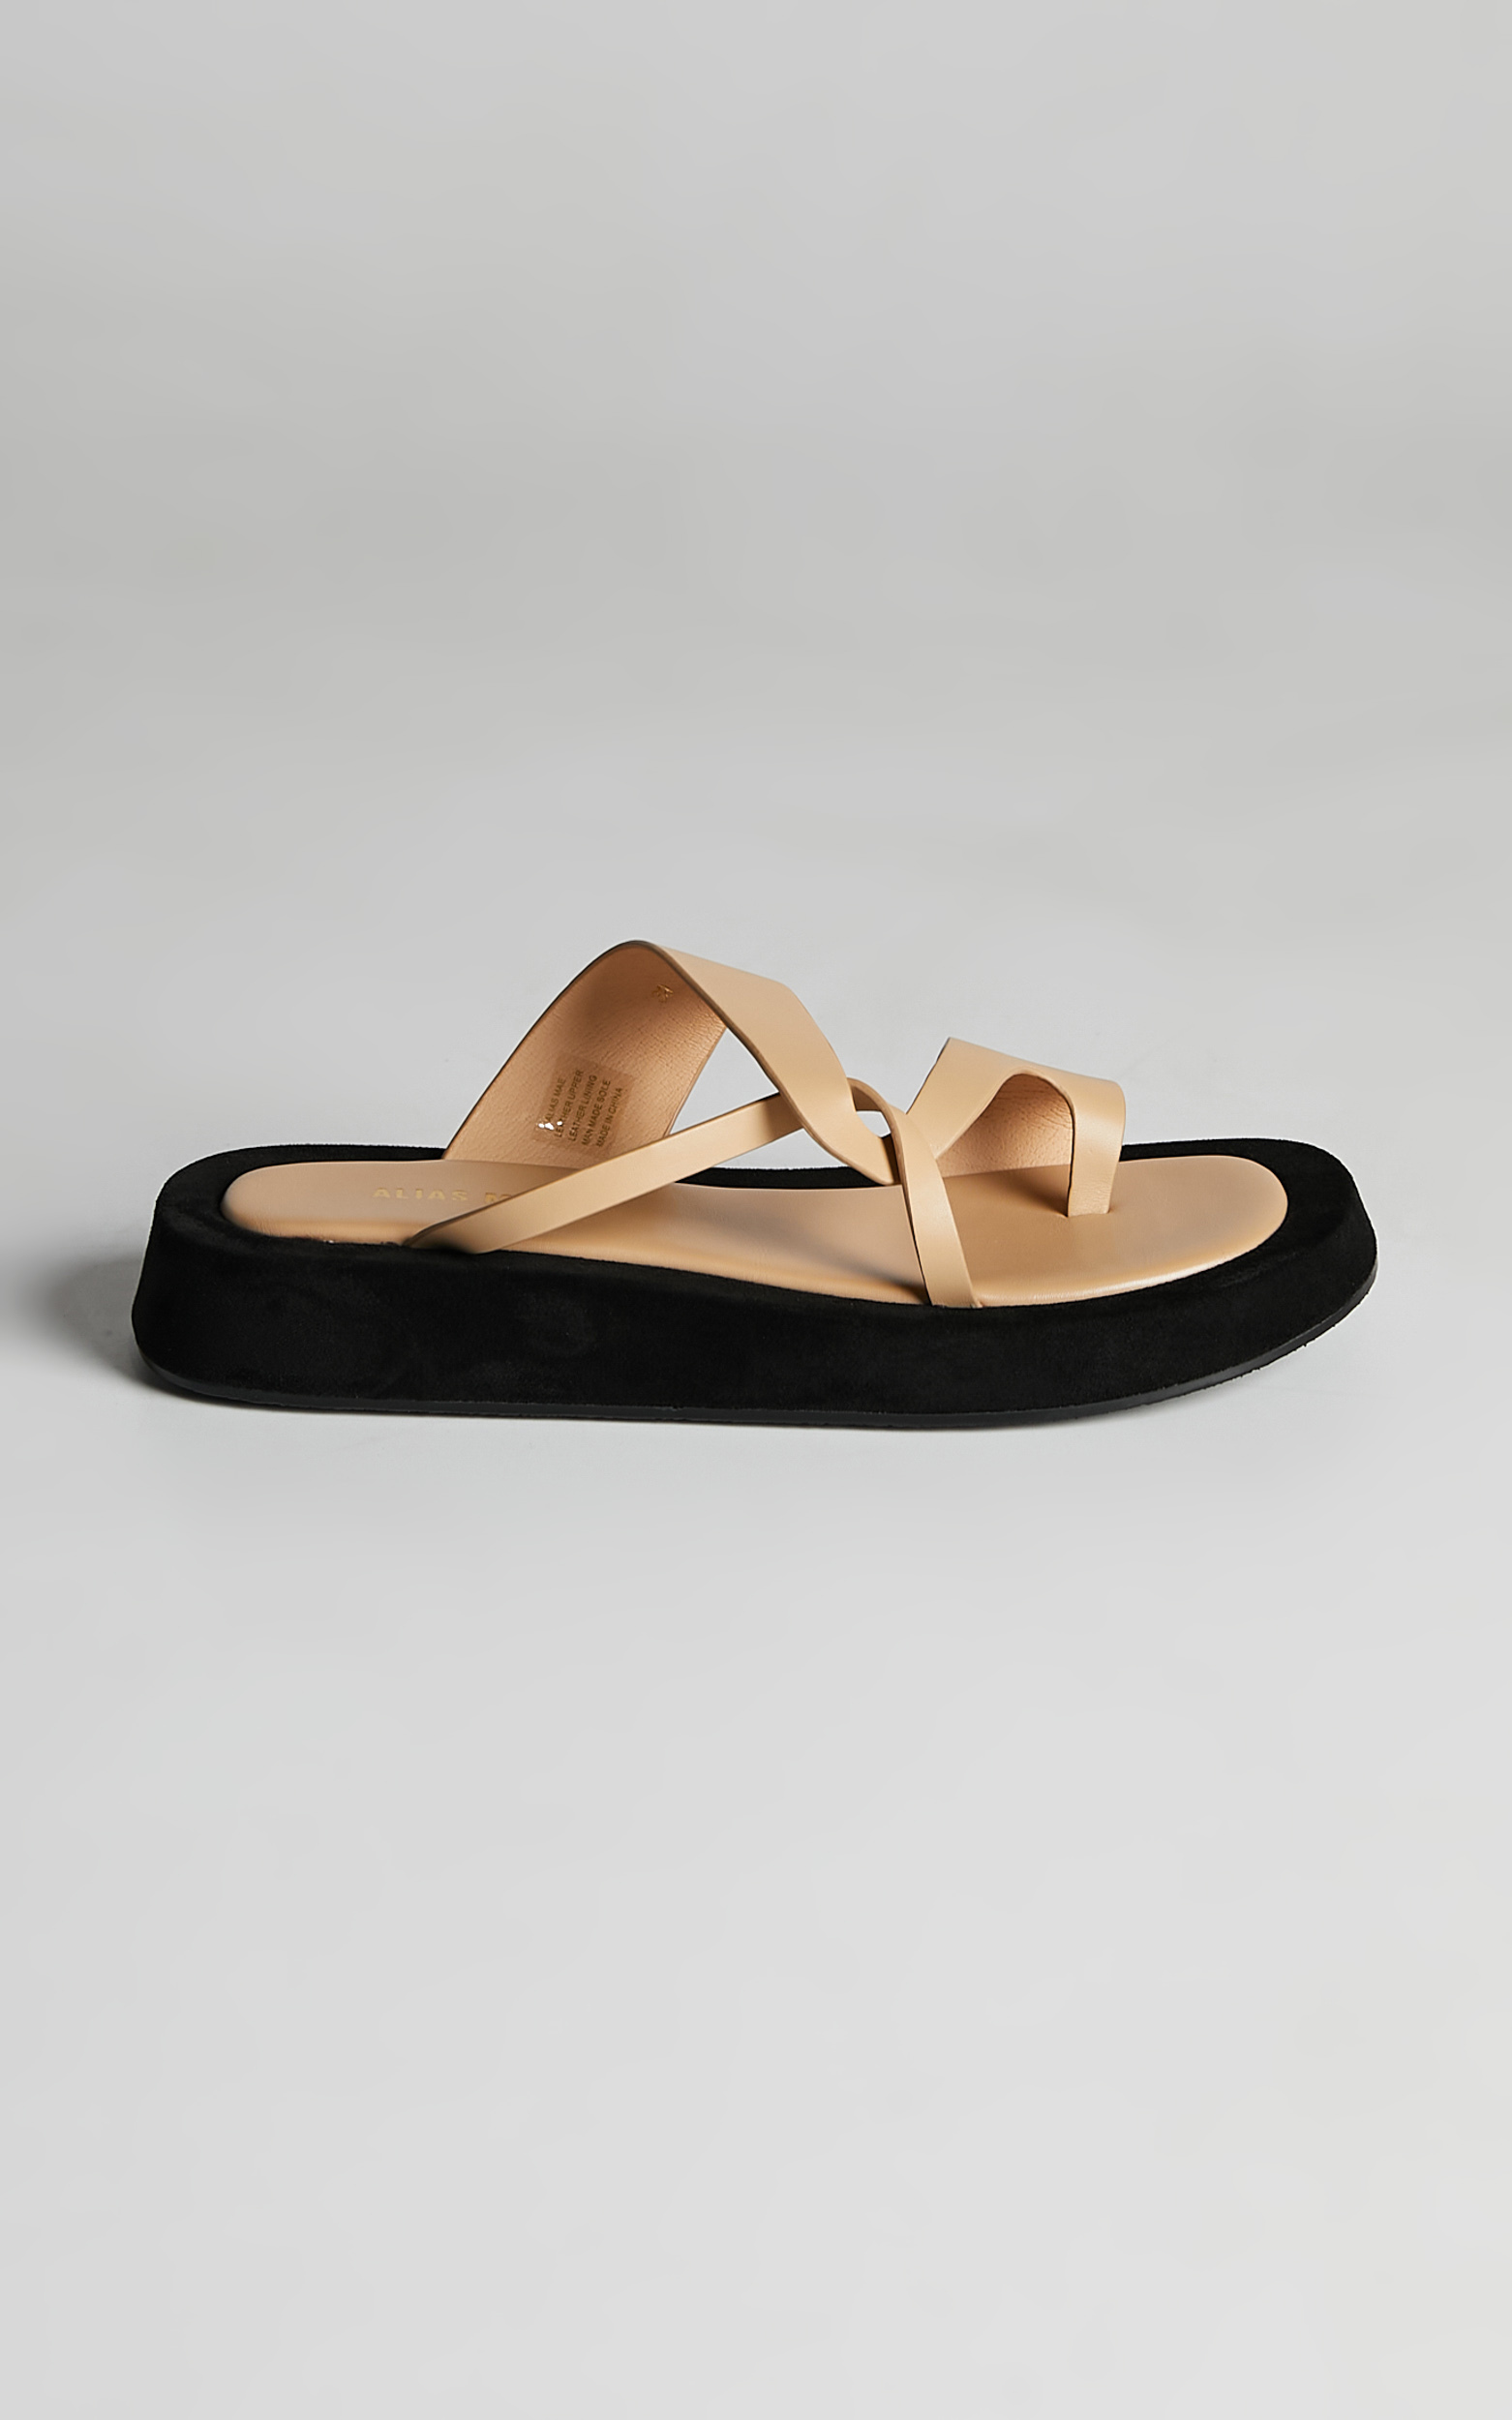 ALIAS MAE - POLO SANDALS in Natural - 10.5, NEU2, hi-res image number null